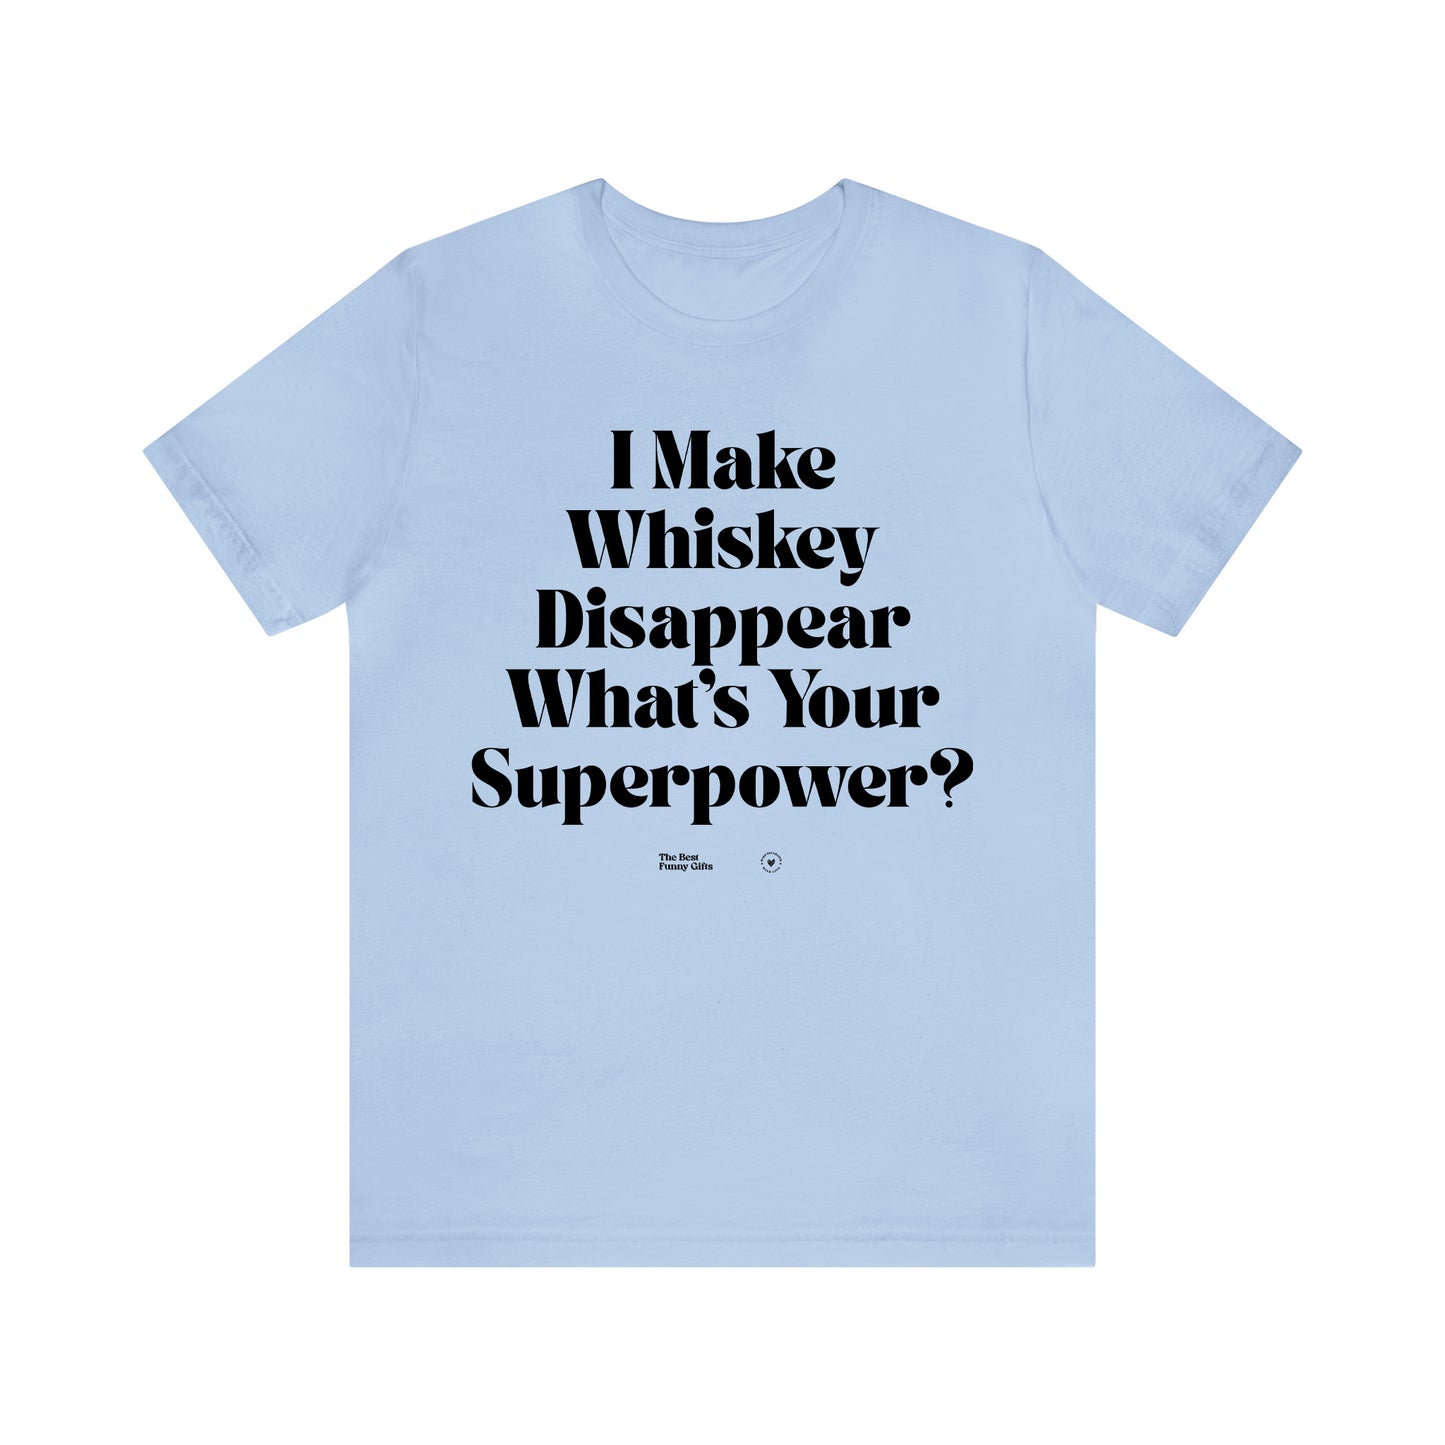 Funny Shirts for Women - I Make Whiskey Disappear What's Your Superpower? - Women’s T Shirts